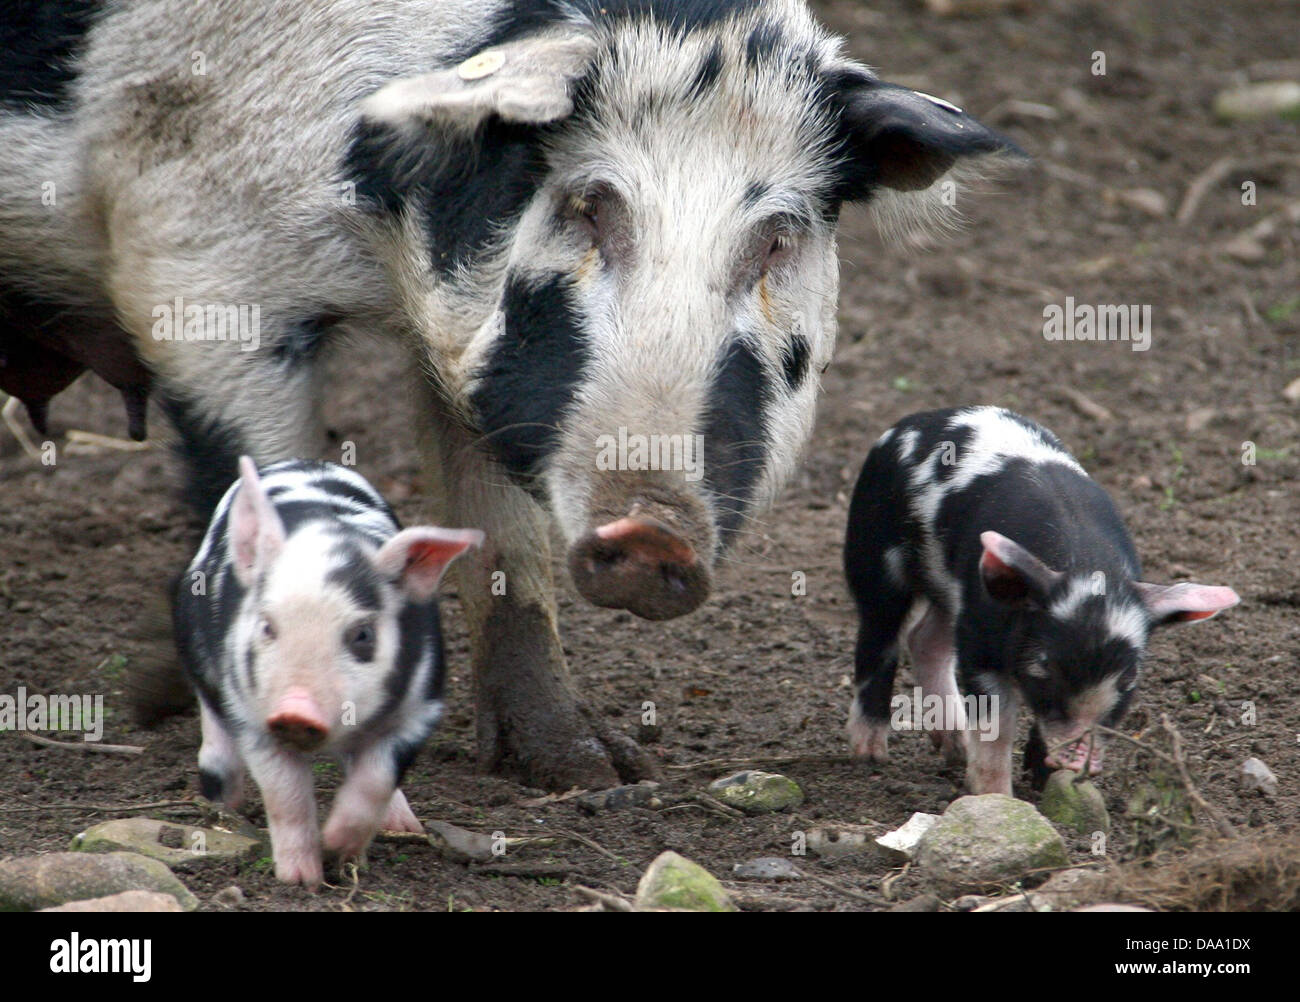 (dpa File) A file picture, dated 14 December 2008,  shows a Bentheim Black Pied swine and her piglets wandering through the enclosure at the animal park in Warder, Germany. The 'Gesellschaft zur Erhaltung alter und gefährdeter Haustierrassen' (GEH), a society for the conservation of old breeds of livestock and endangered pets, has launched the Ark Project, which is aimed at preserv Stock Photo